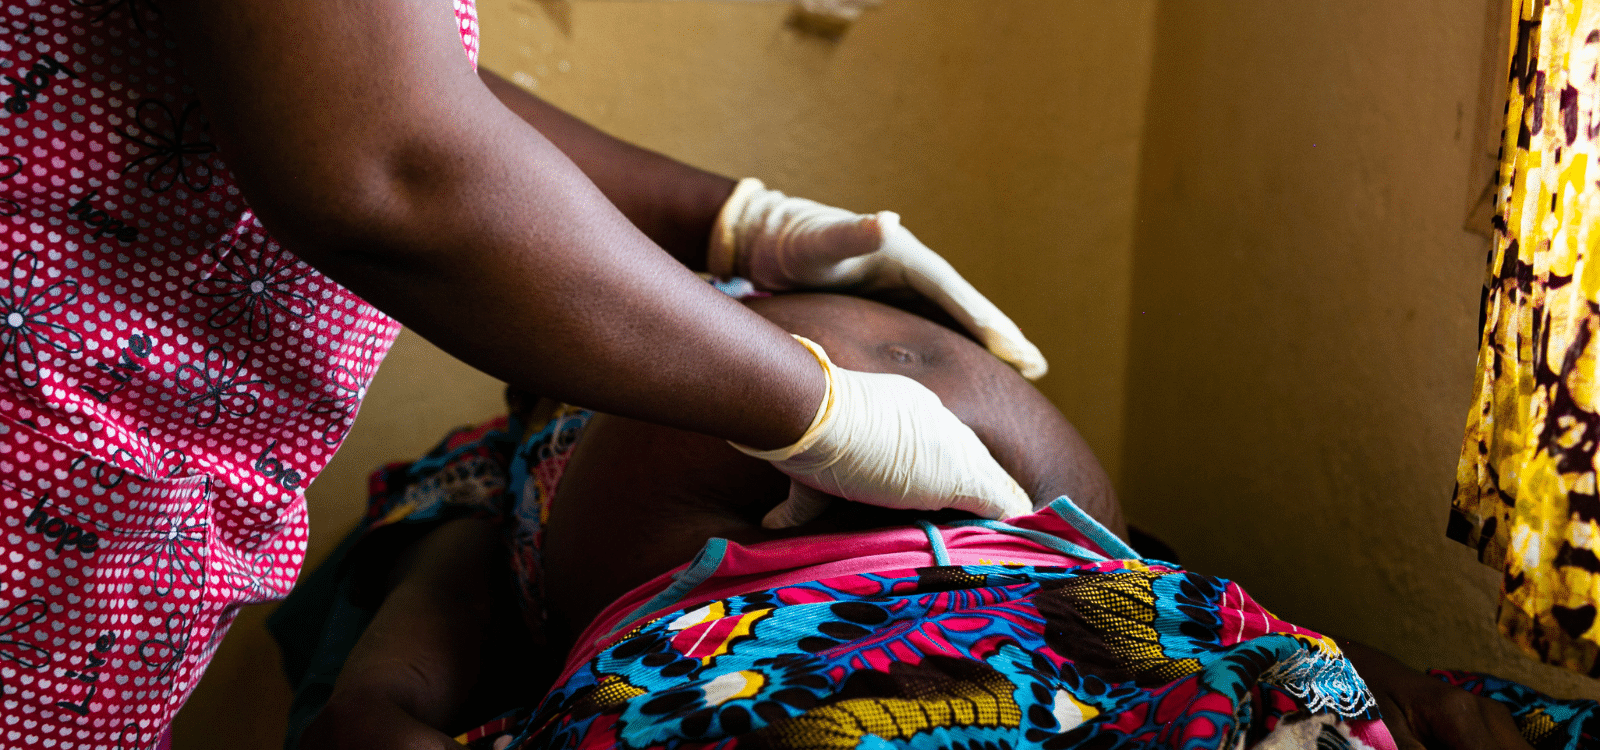 Pregnant woman receiving medical care